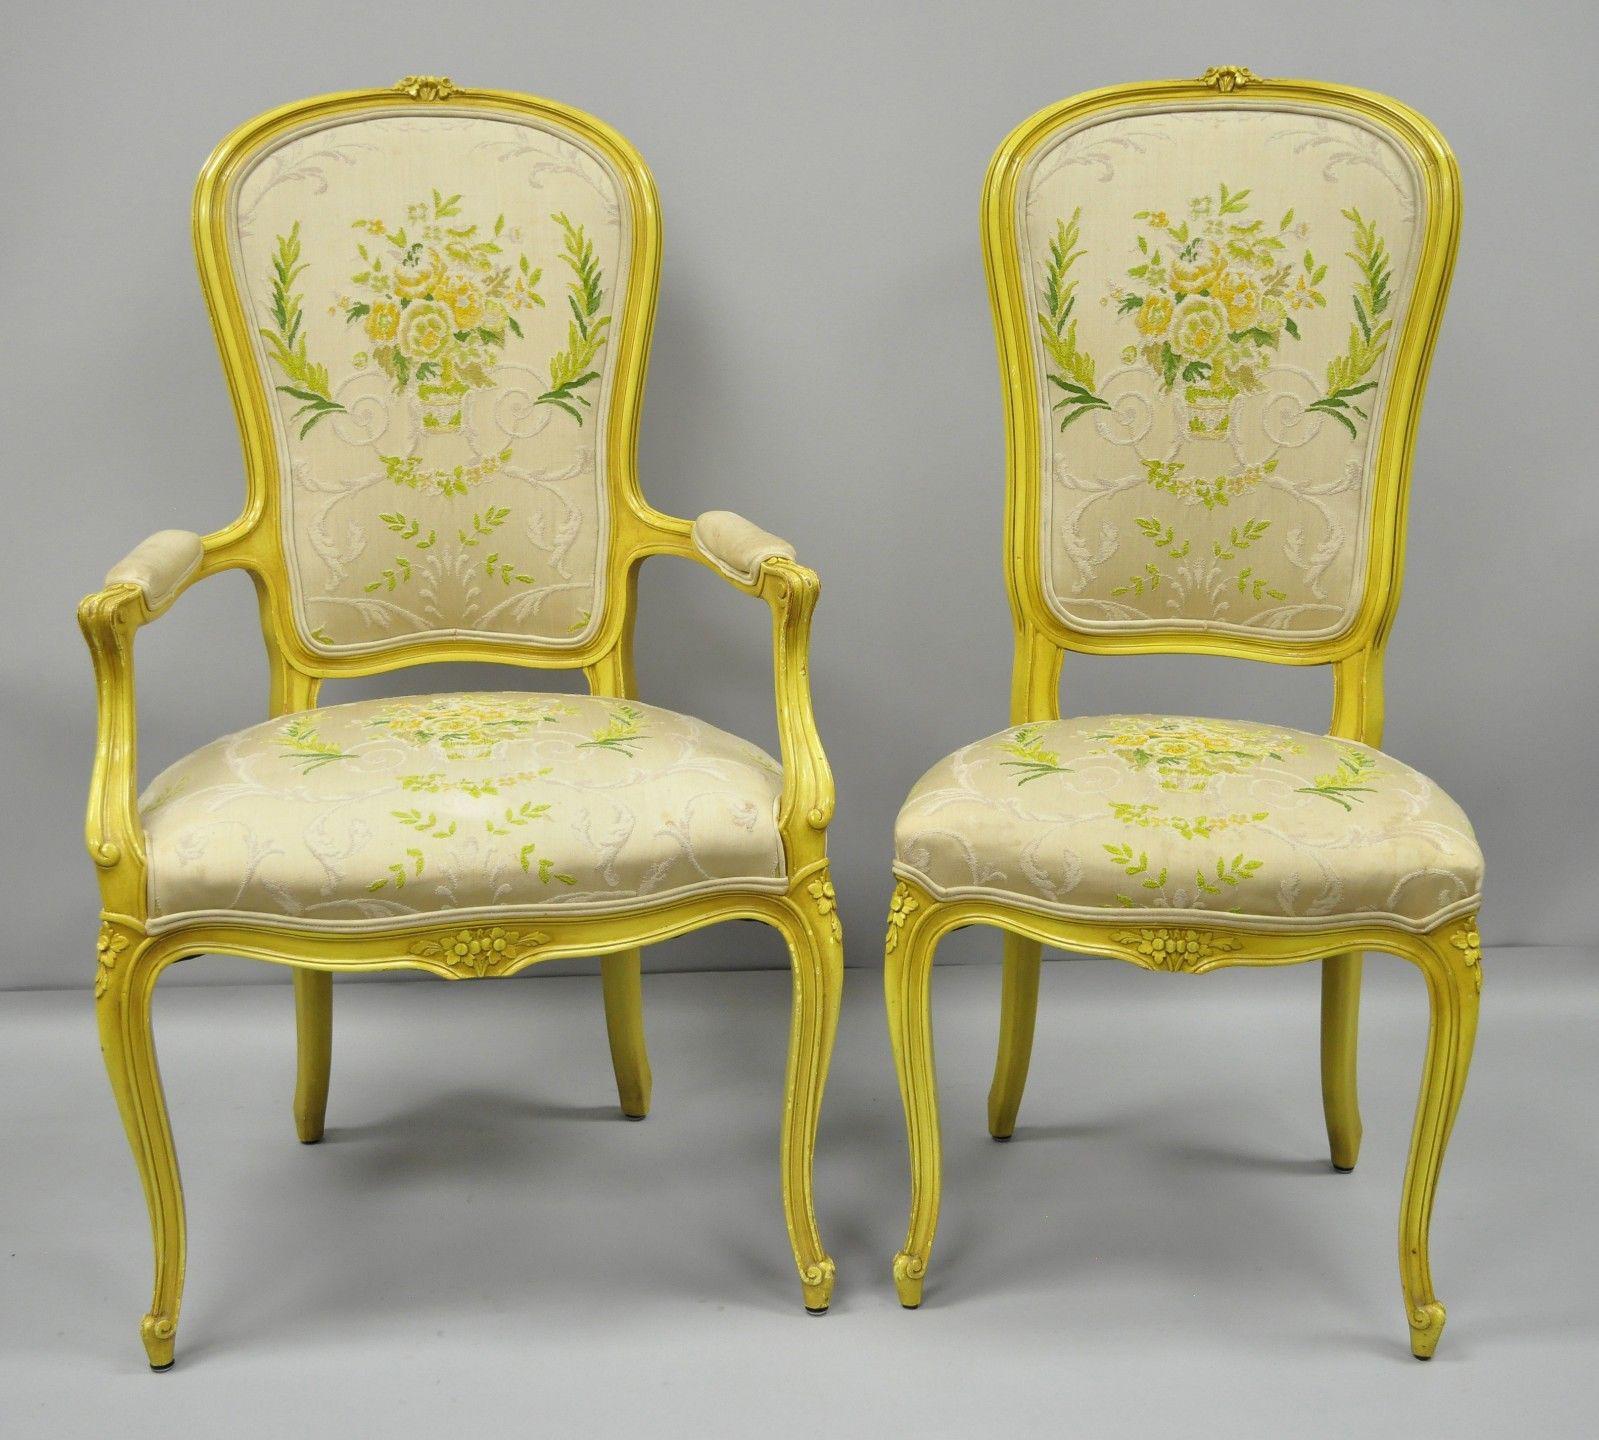 Set of 6 vintage French Provincial Louis XV style yellow Hollywood Regency dining chairs. Listing includes 4 side chairs, 2 armchairs, original yellow finish, floral embroidered upholstery, solid wood construction, cabriole legs, quality American